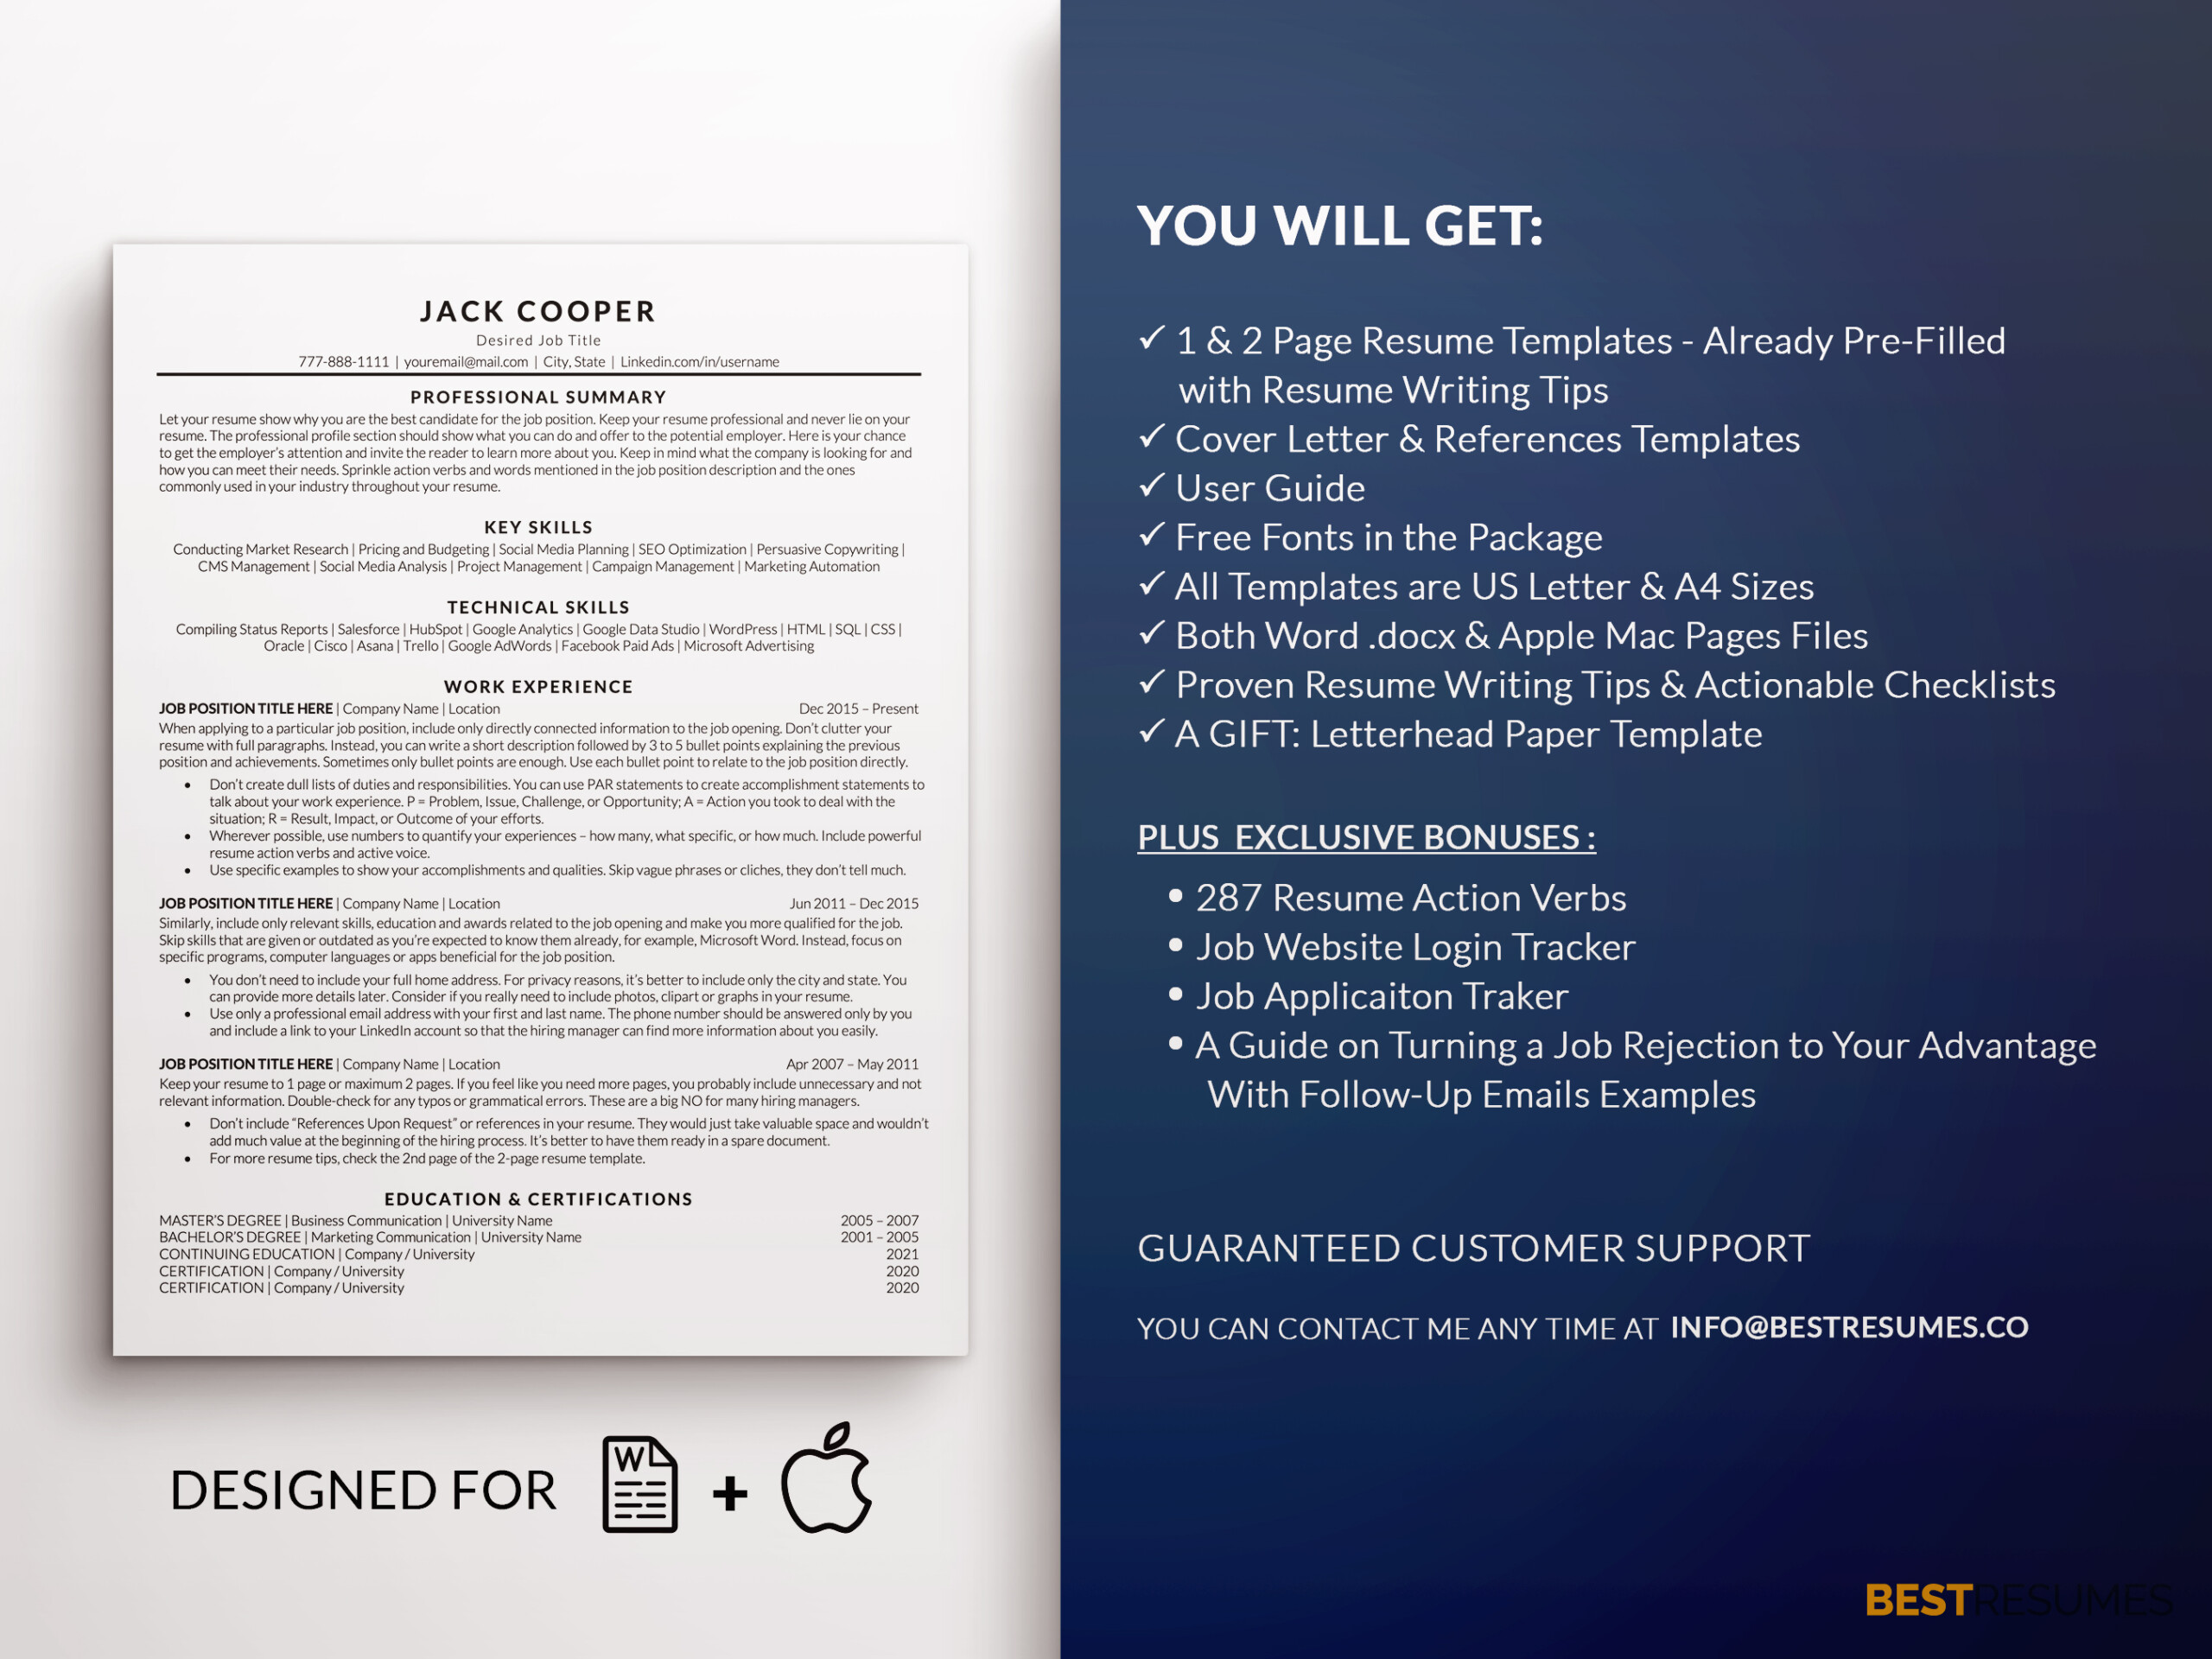 5 Cover Letter Resume in Bulk 1 & 2 pages CV ATS friendly Word and Mac Pages 5 CV 5 References